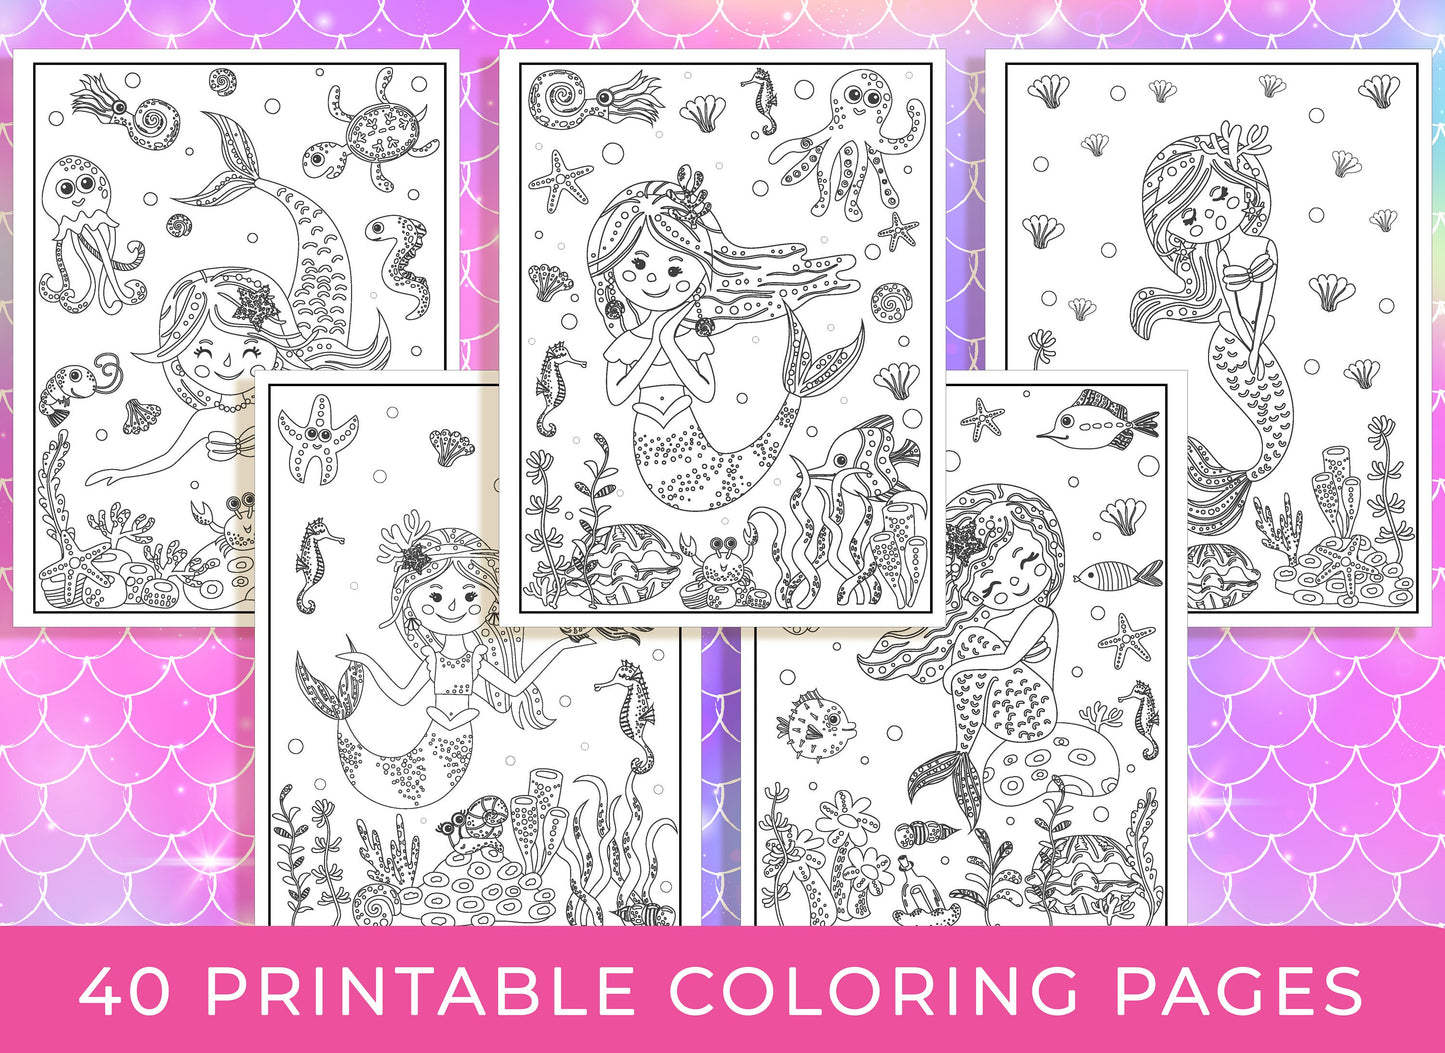 Mermaid Coloring Pages - 40 Printable Mermaid Coloring Pages for Girls, Teens & Kids, Mermaid Birthday Party Activity, Girls Birthday Party